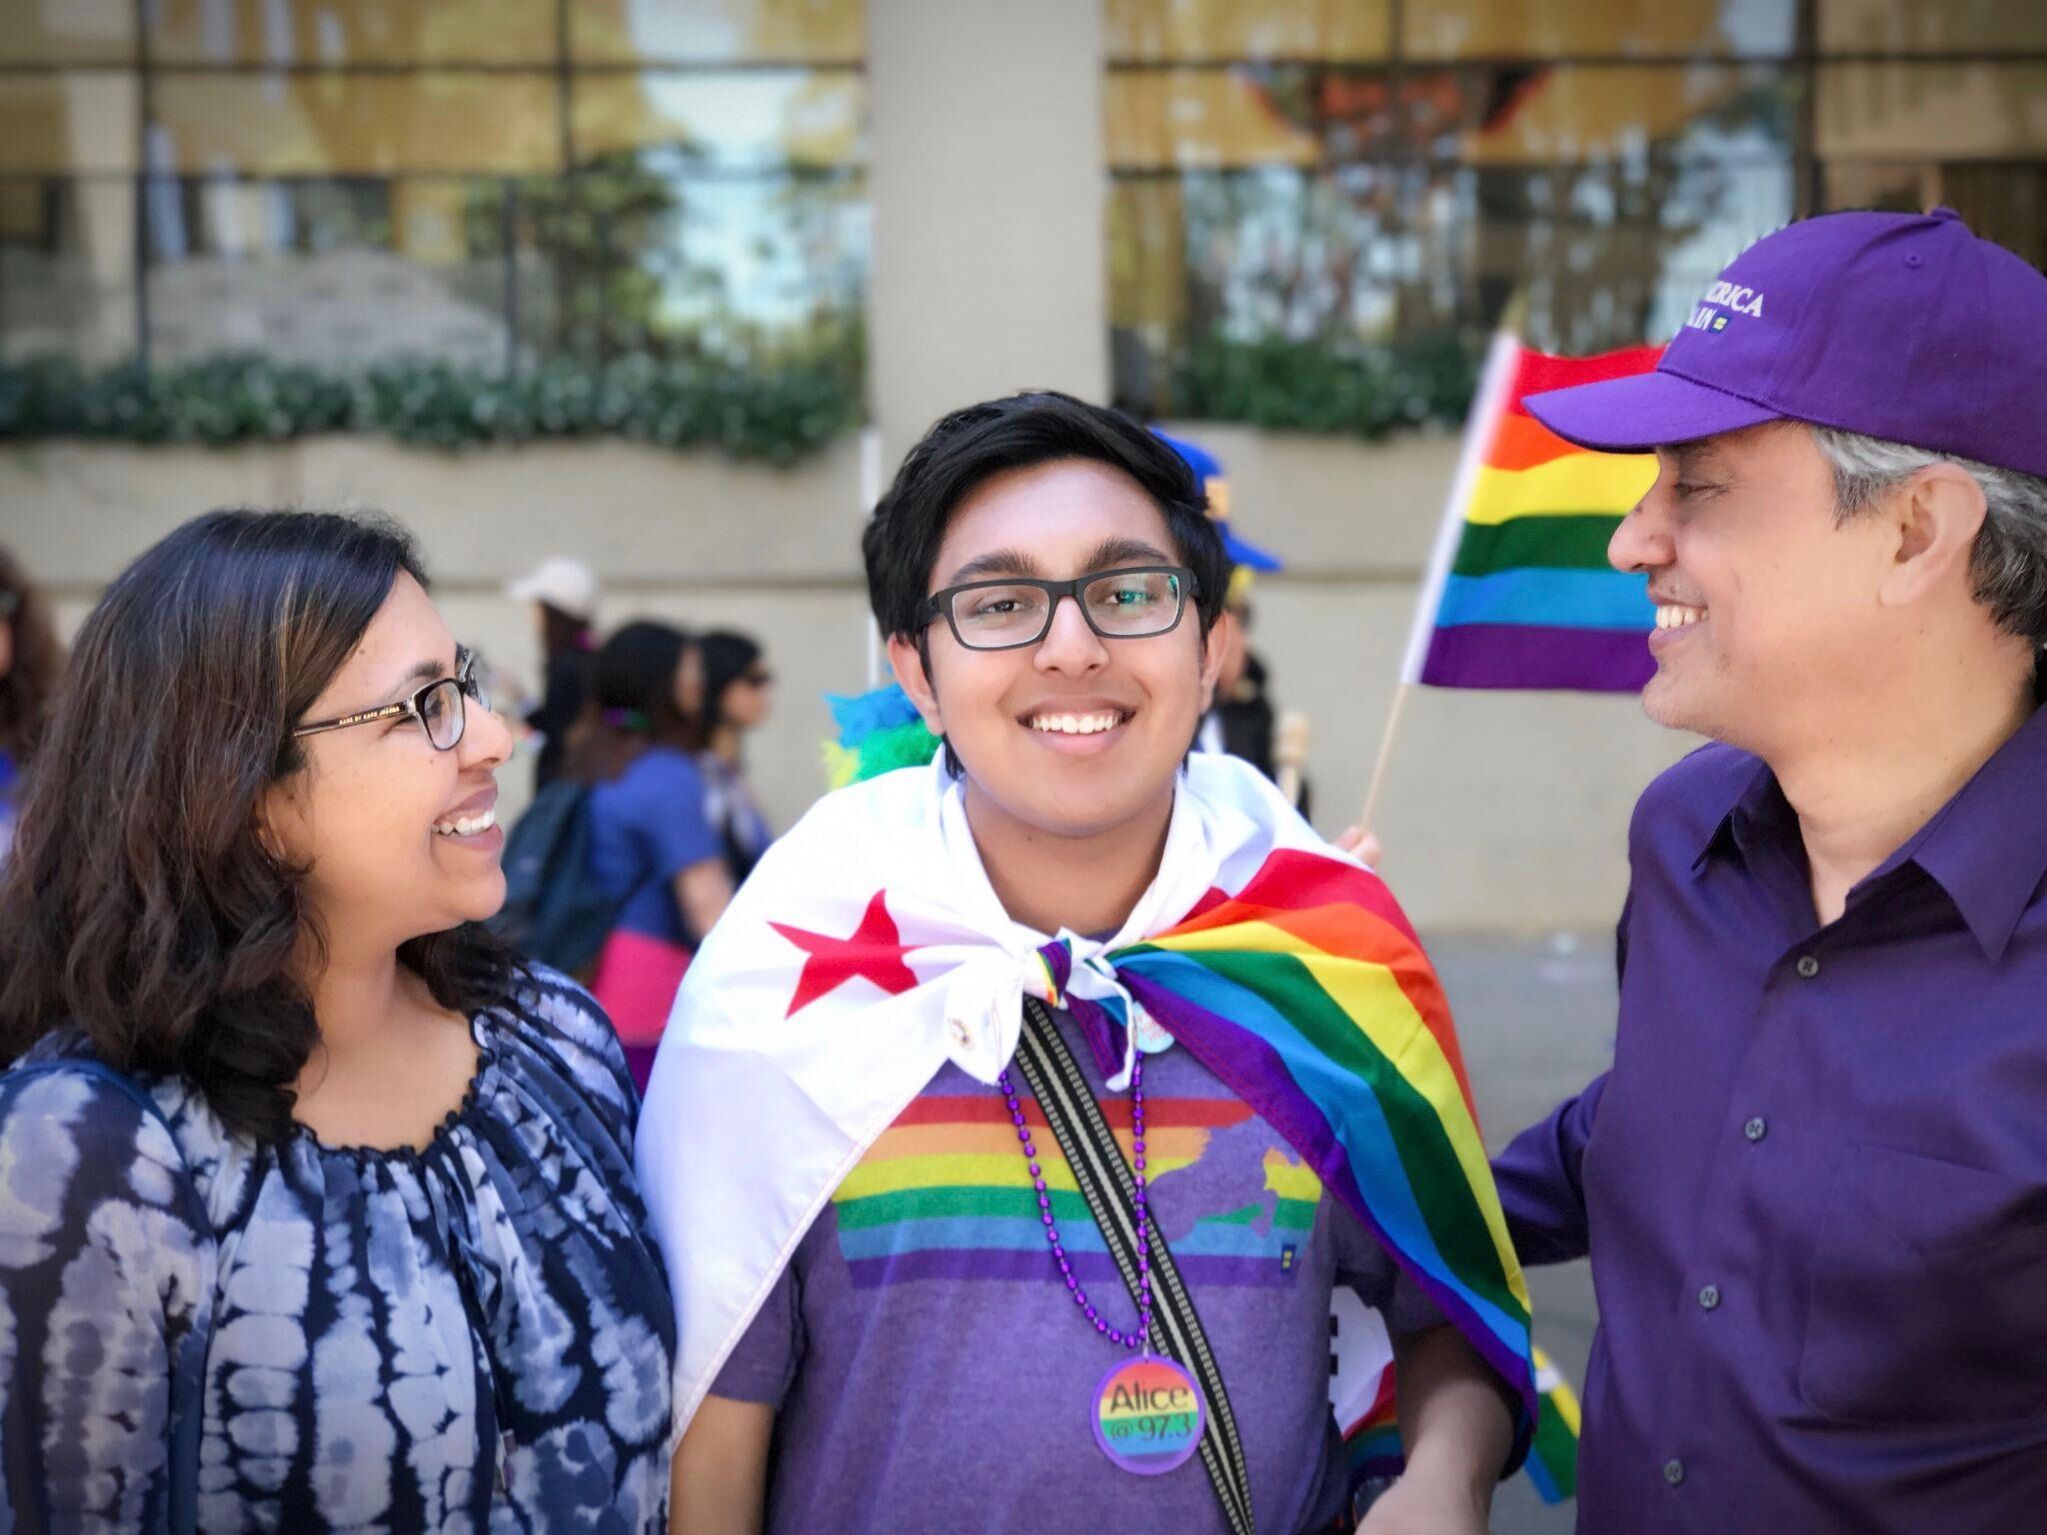 Sameer Jha, center, with parents Charmaine Hussain, left, and Sudhir Jha, right, at the 2017 San Francisco Pride Parade. Photo courtesy of Sameer Jha 